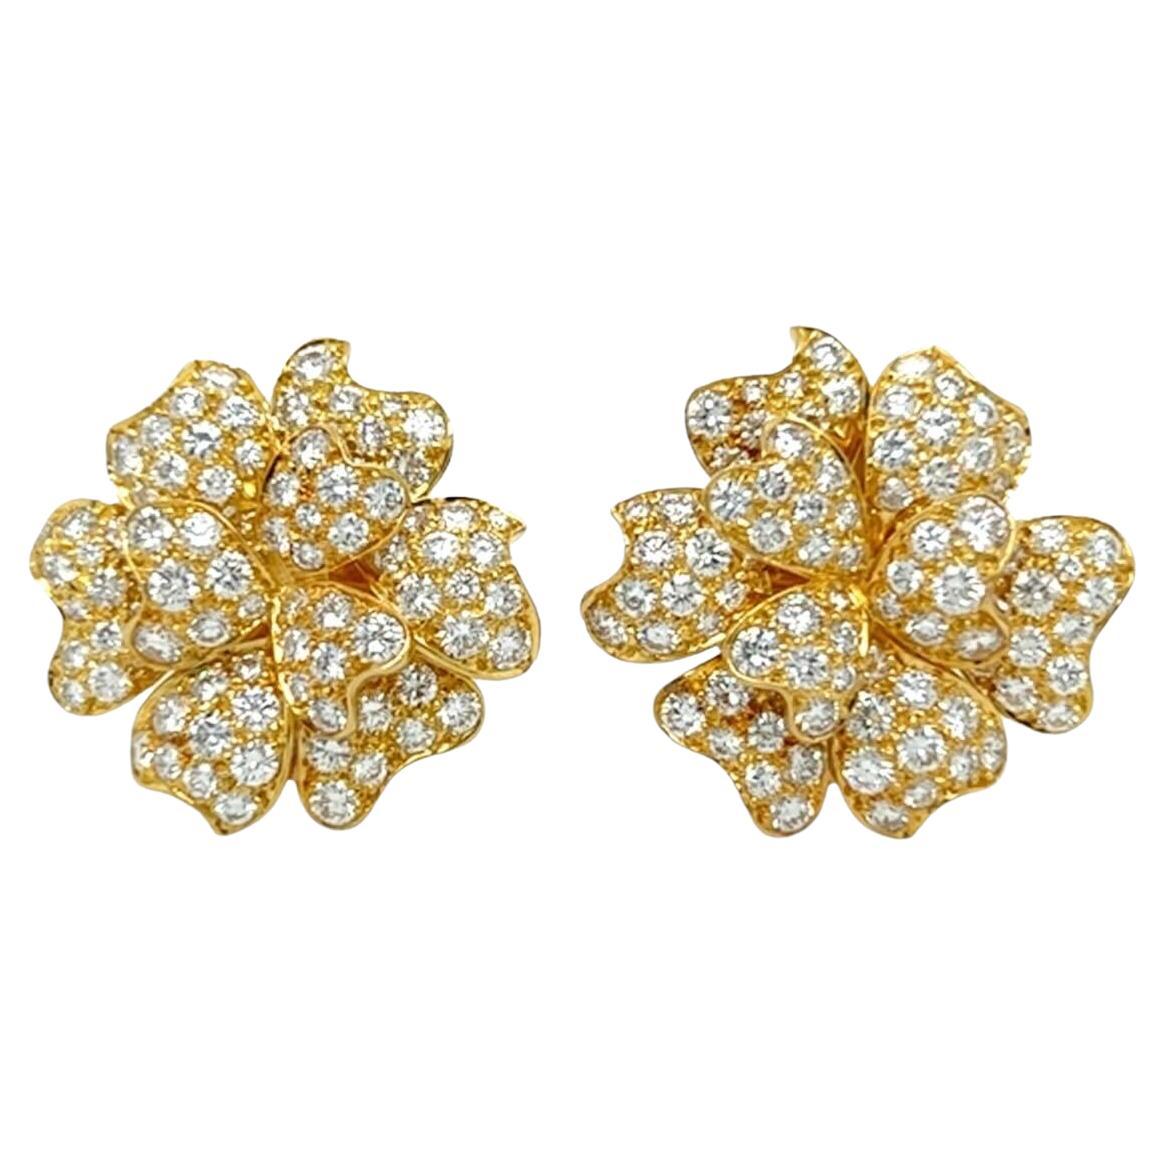 Pair of Yellow Gold and Diamond Flower Earrings